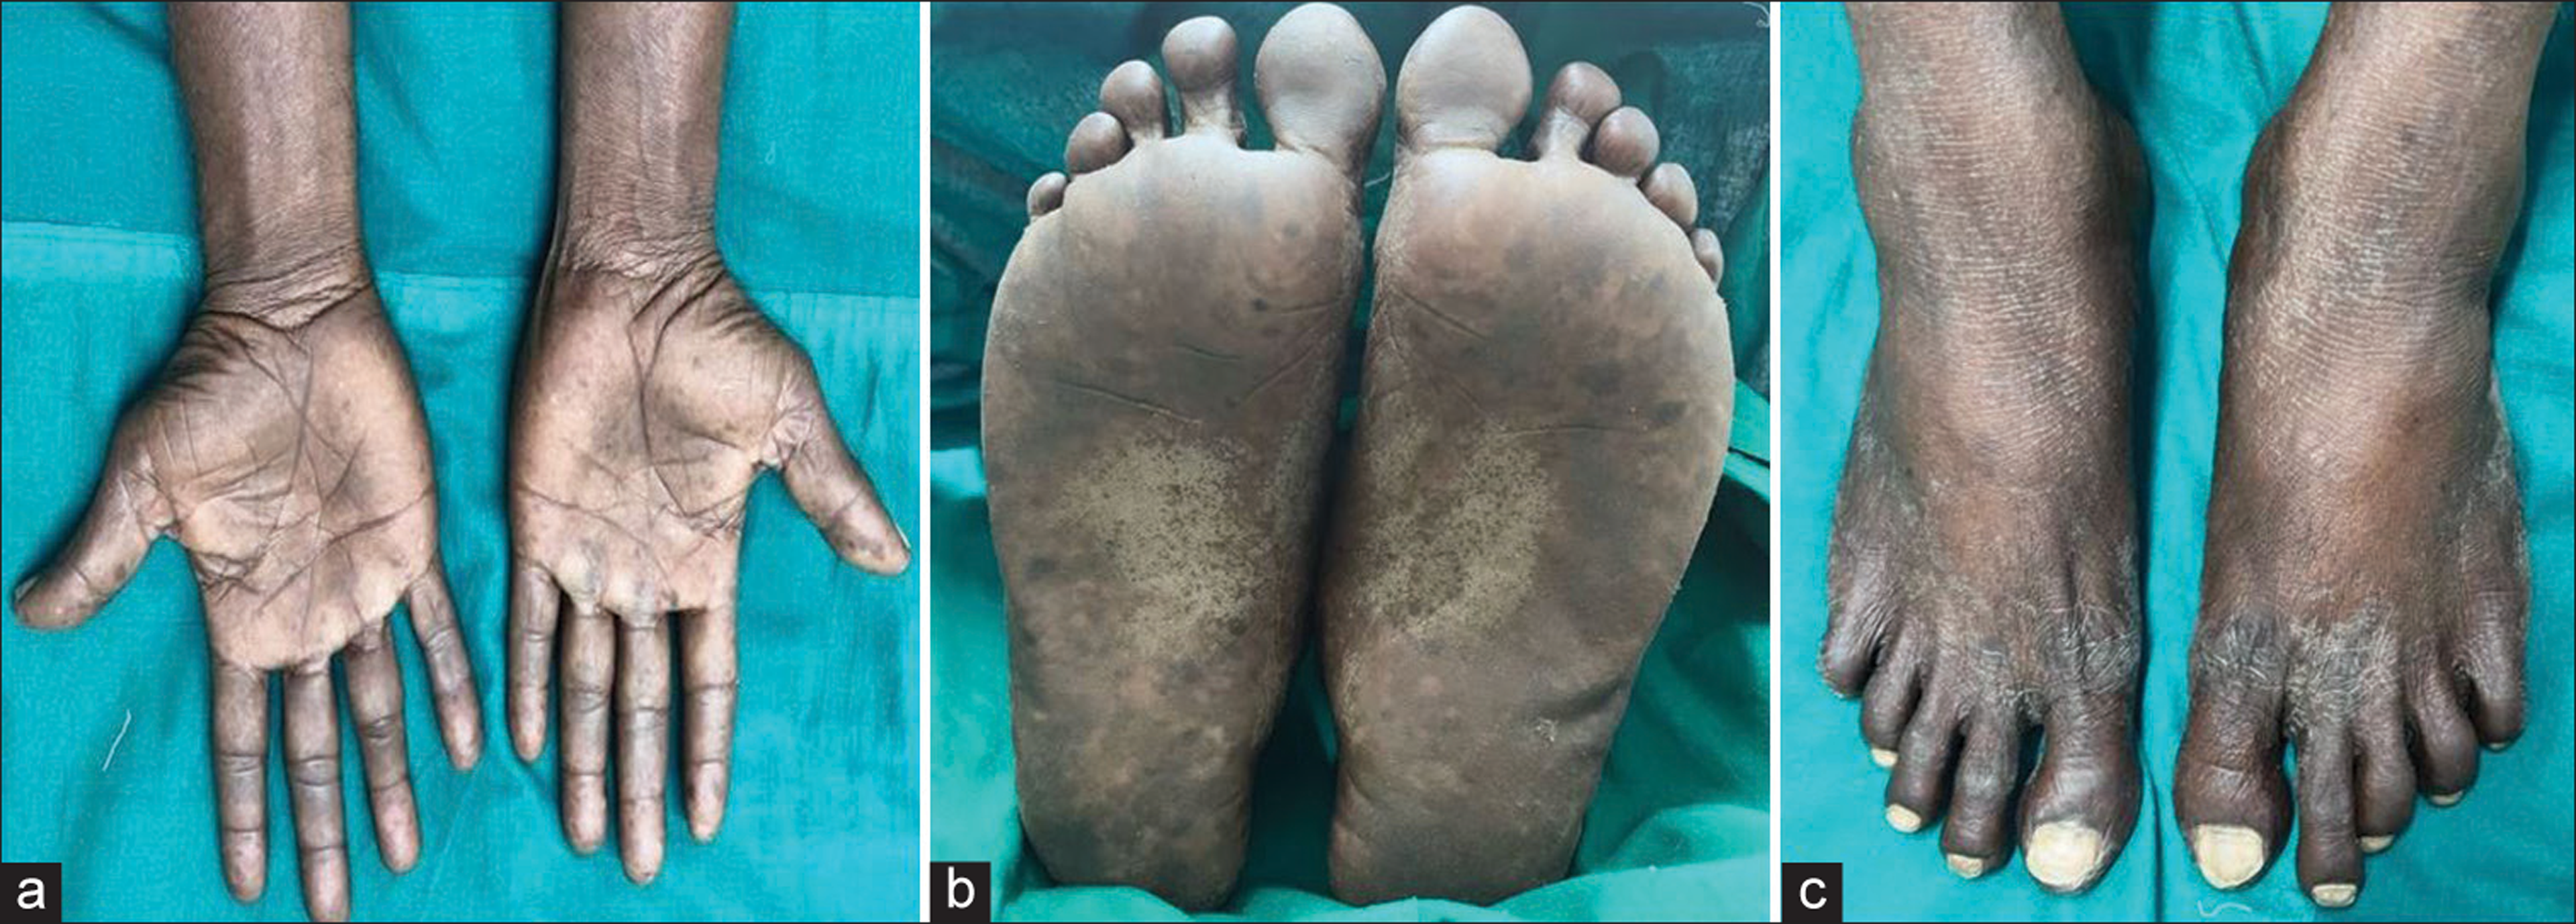 (a-c) Diffuse erythema over the palms and soles with accentuation in areas of weight-bearing and additional areas of hyperkeratosis and focal desquamation in the soles with extension to the dorsum of toes.